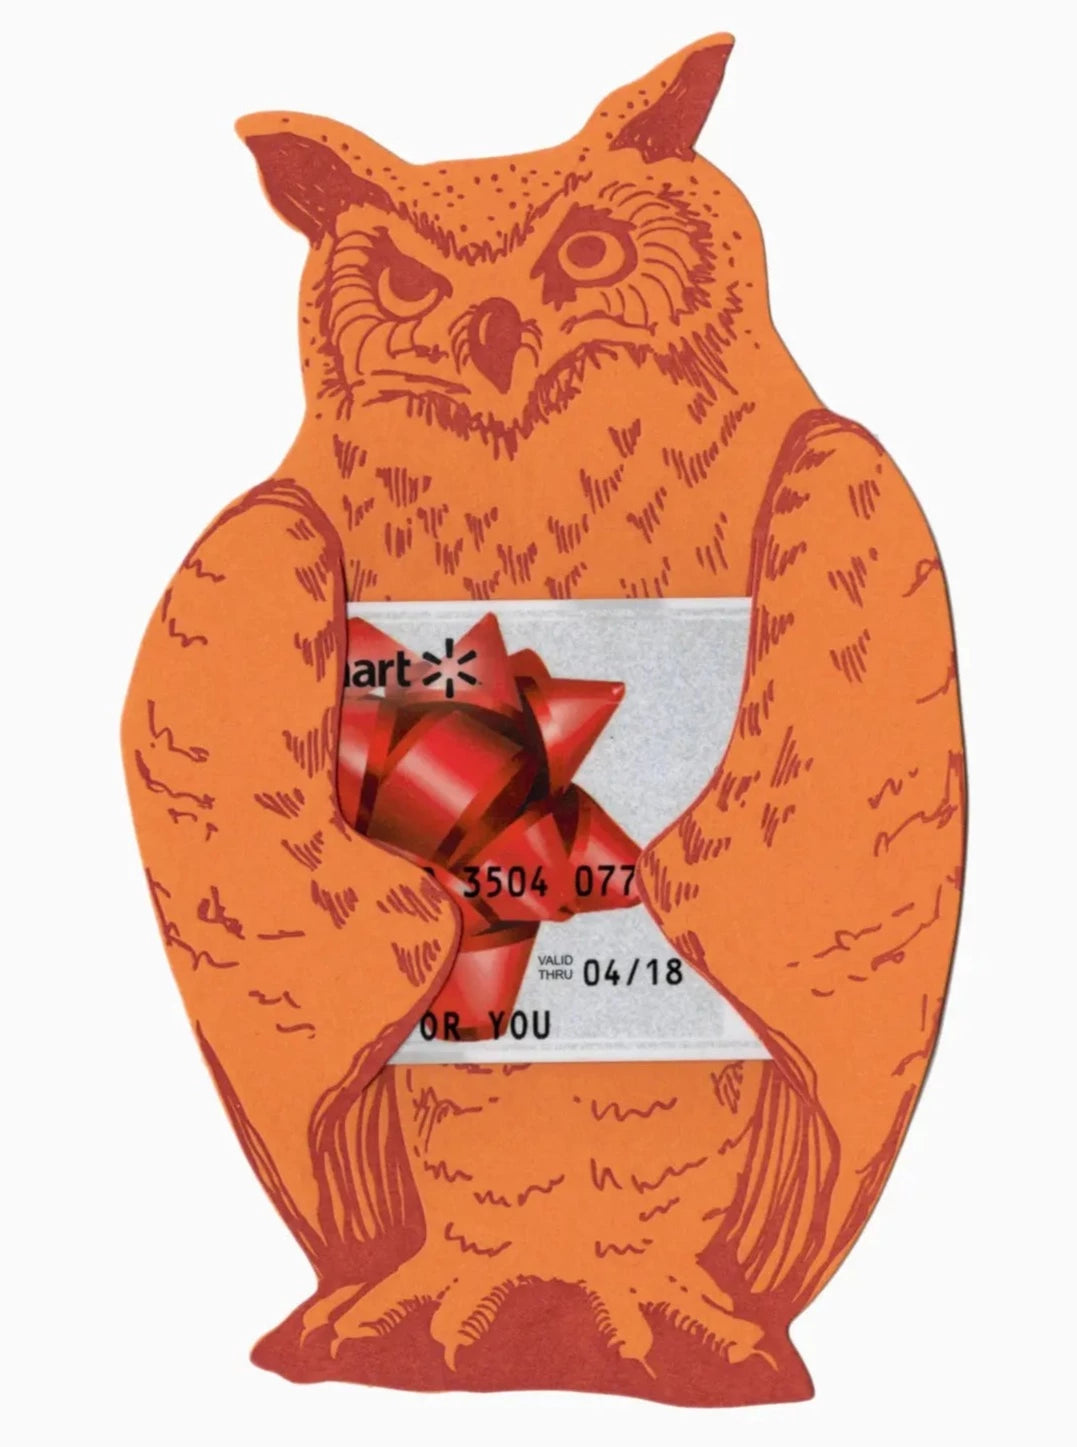 Woot Owl Gift Card